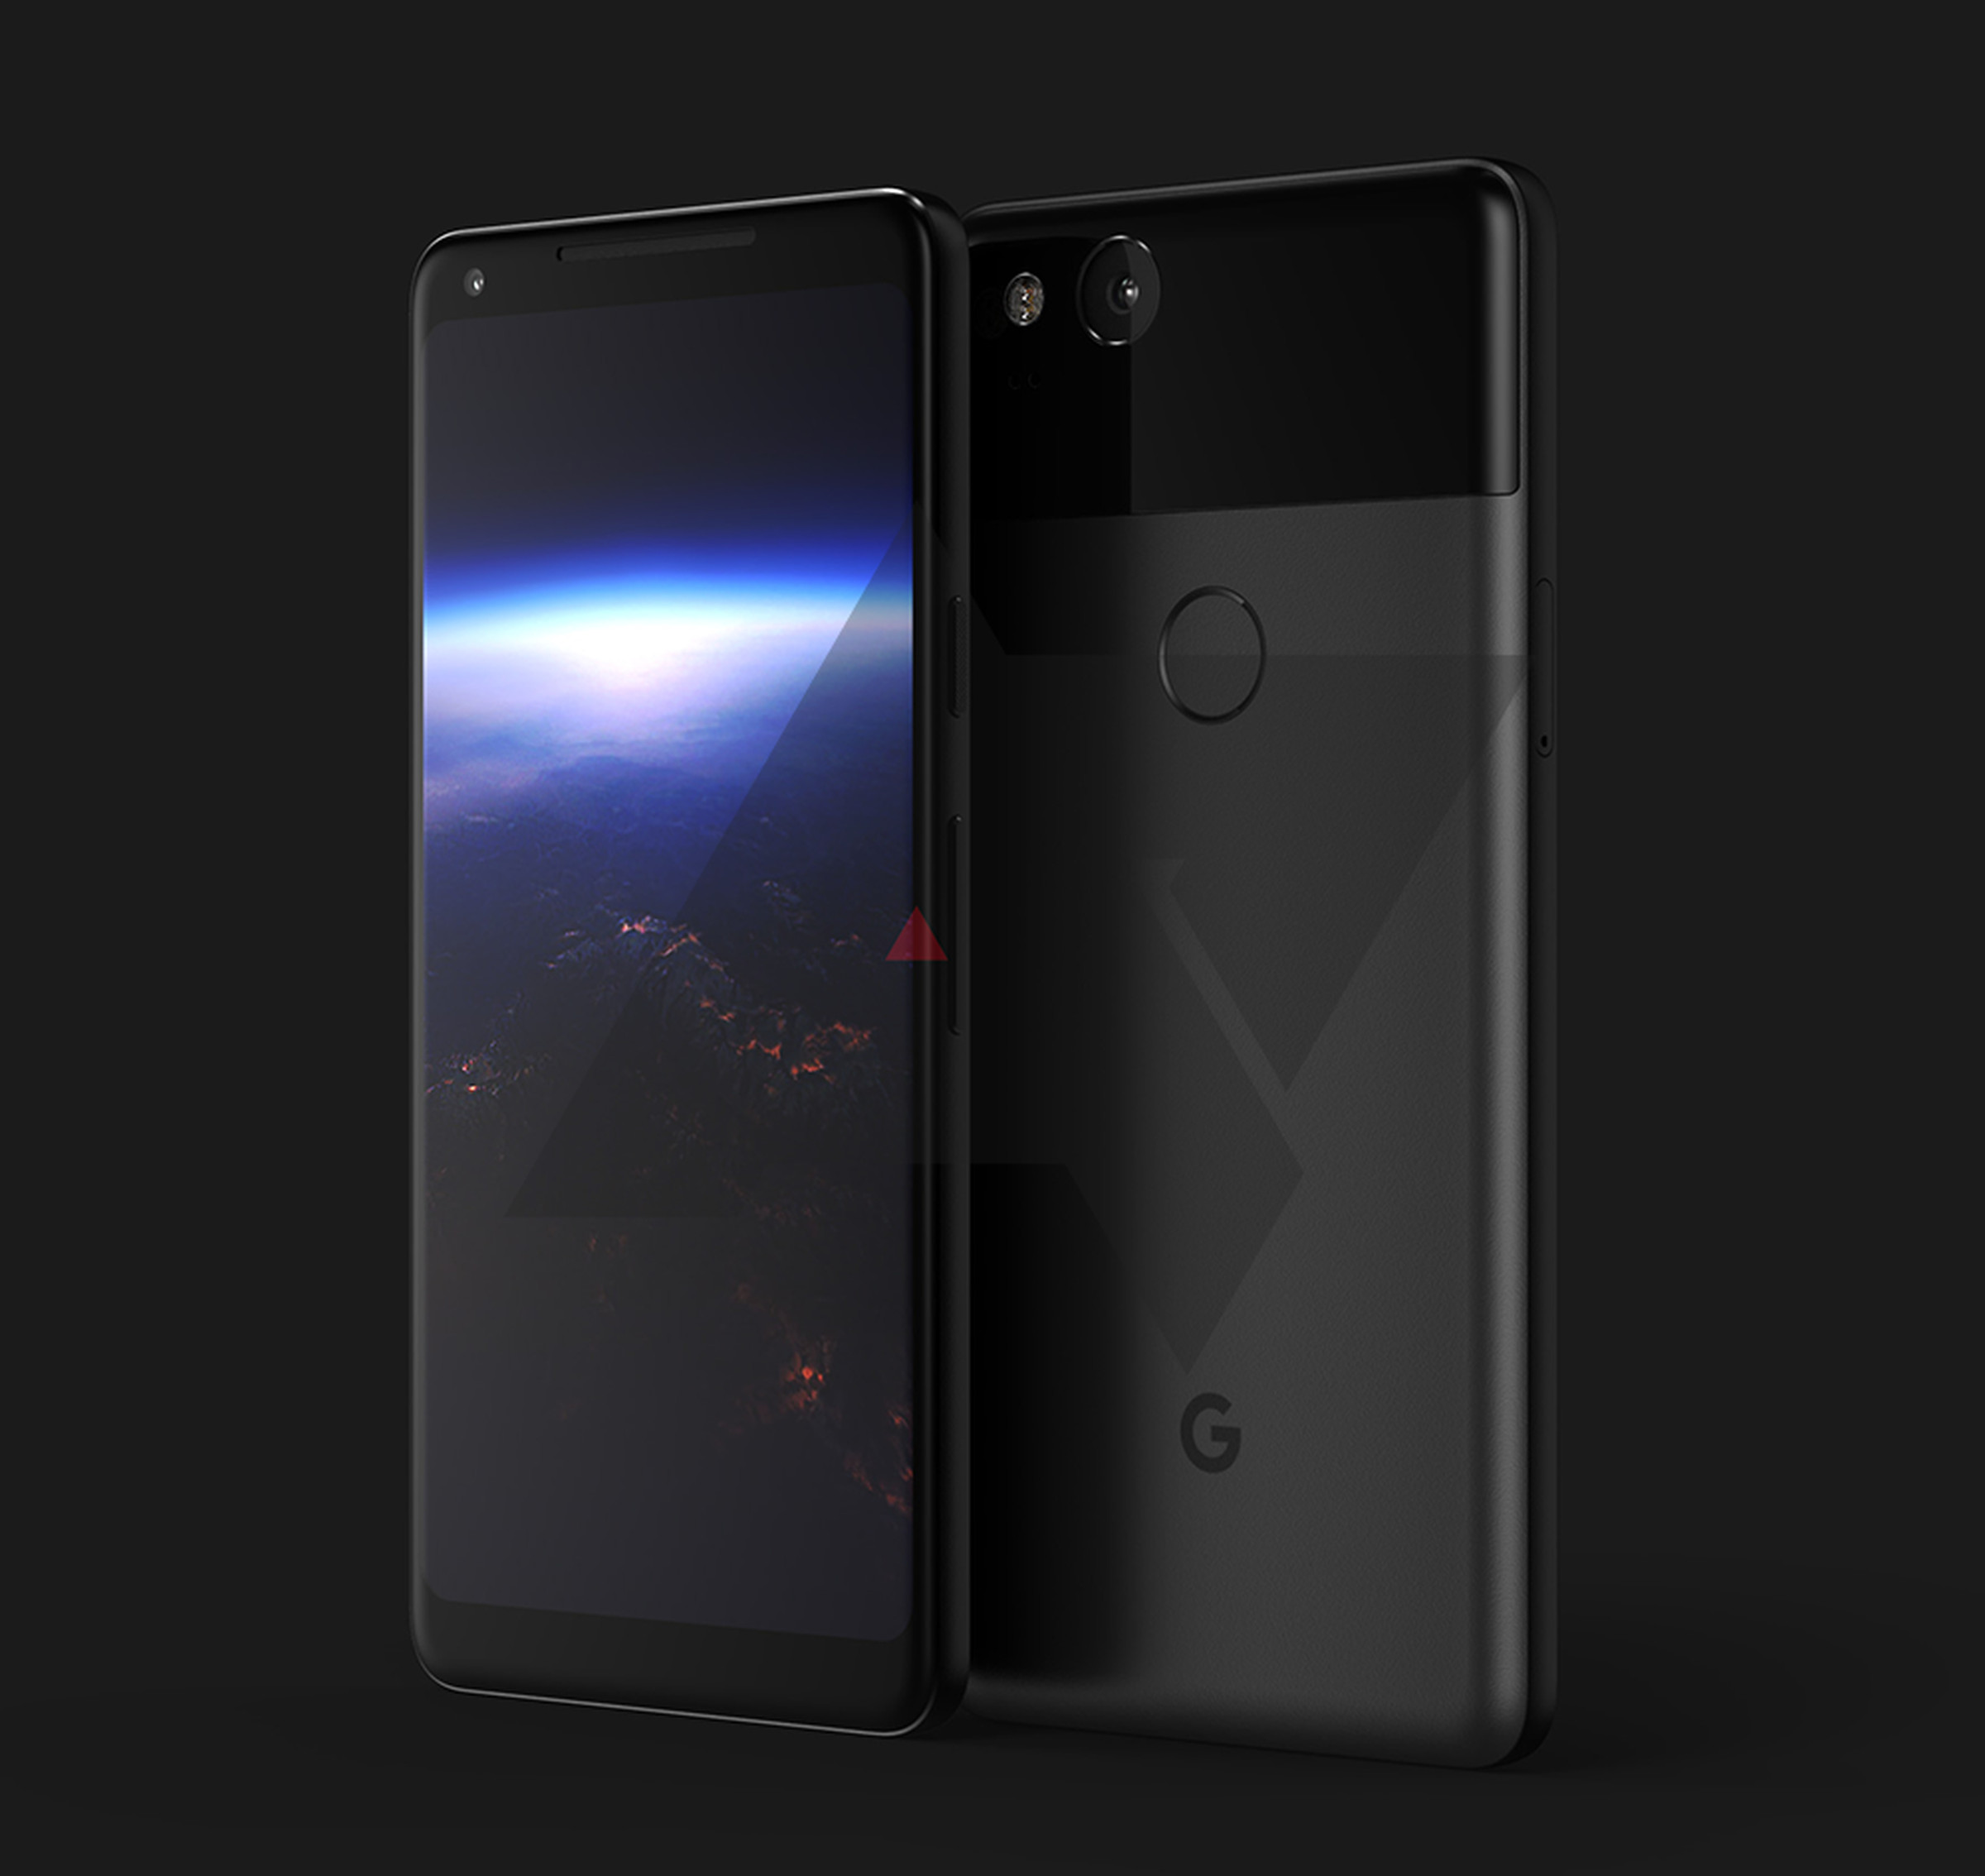 The Pixel 2 XL will feature a large, 6-inch OLED screen. 